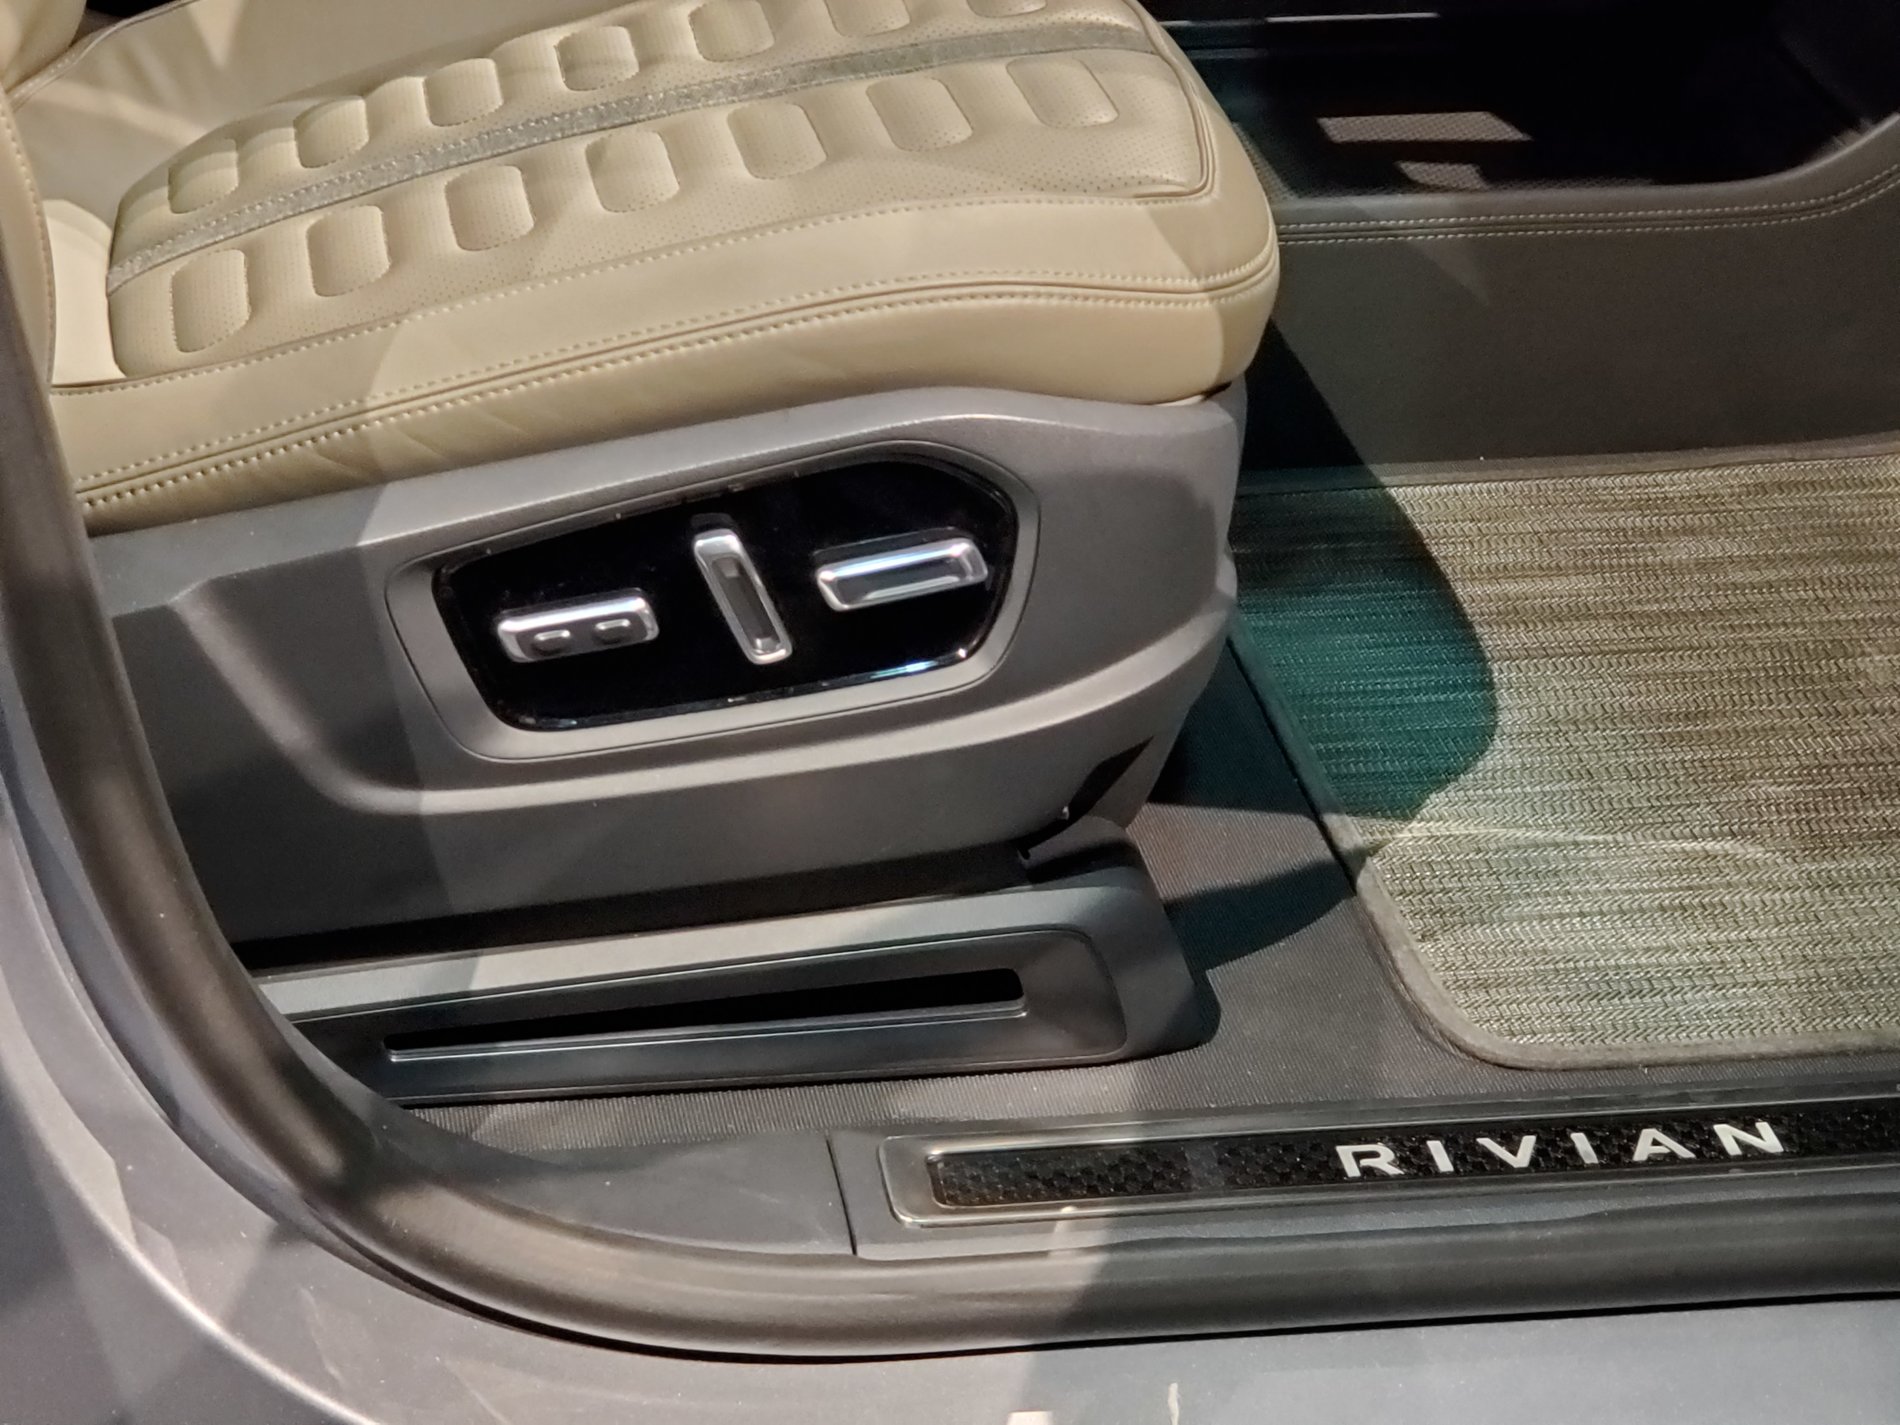 Rivian R1T R1S LIVE from Rivian's NY Auto Show Preview Event! (Q&A and R1T / R1S Hands-On) 20190412_190150